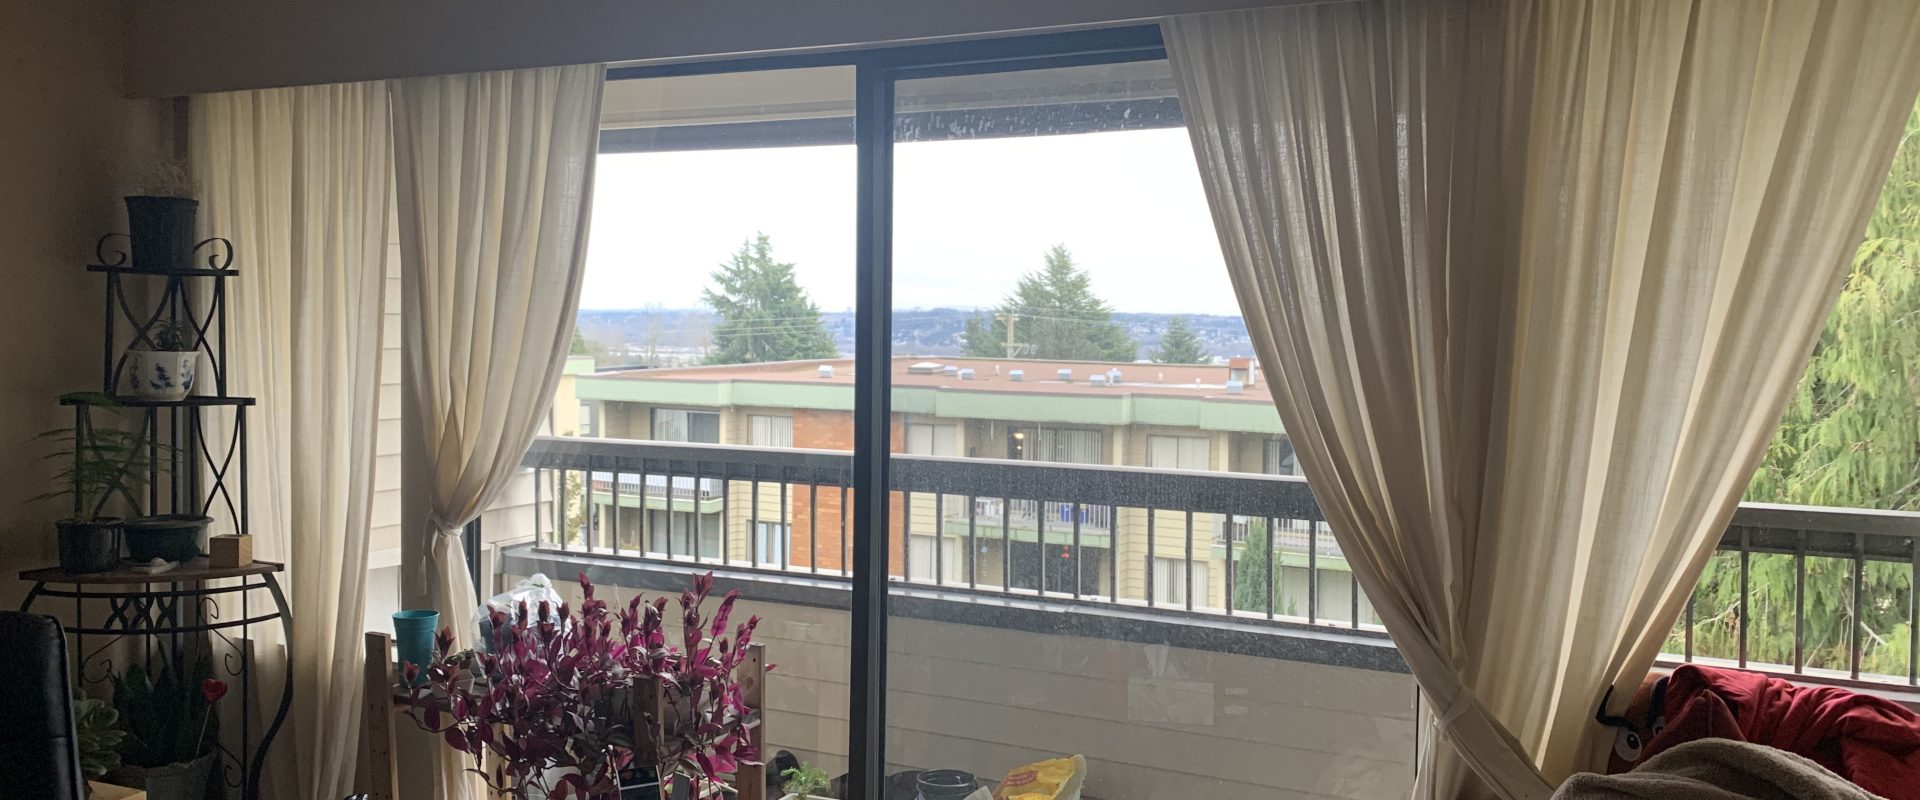 Central Coquitlam South-Facing Panoramic Views 2br 1ba Condo for Rent!